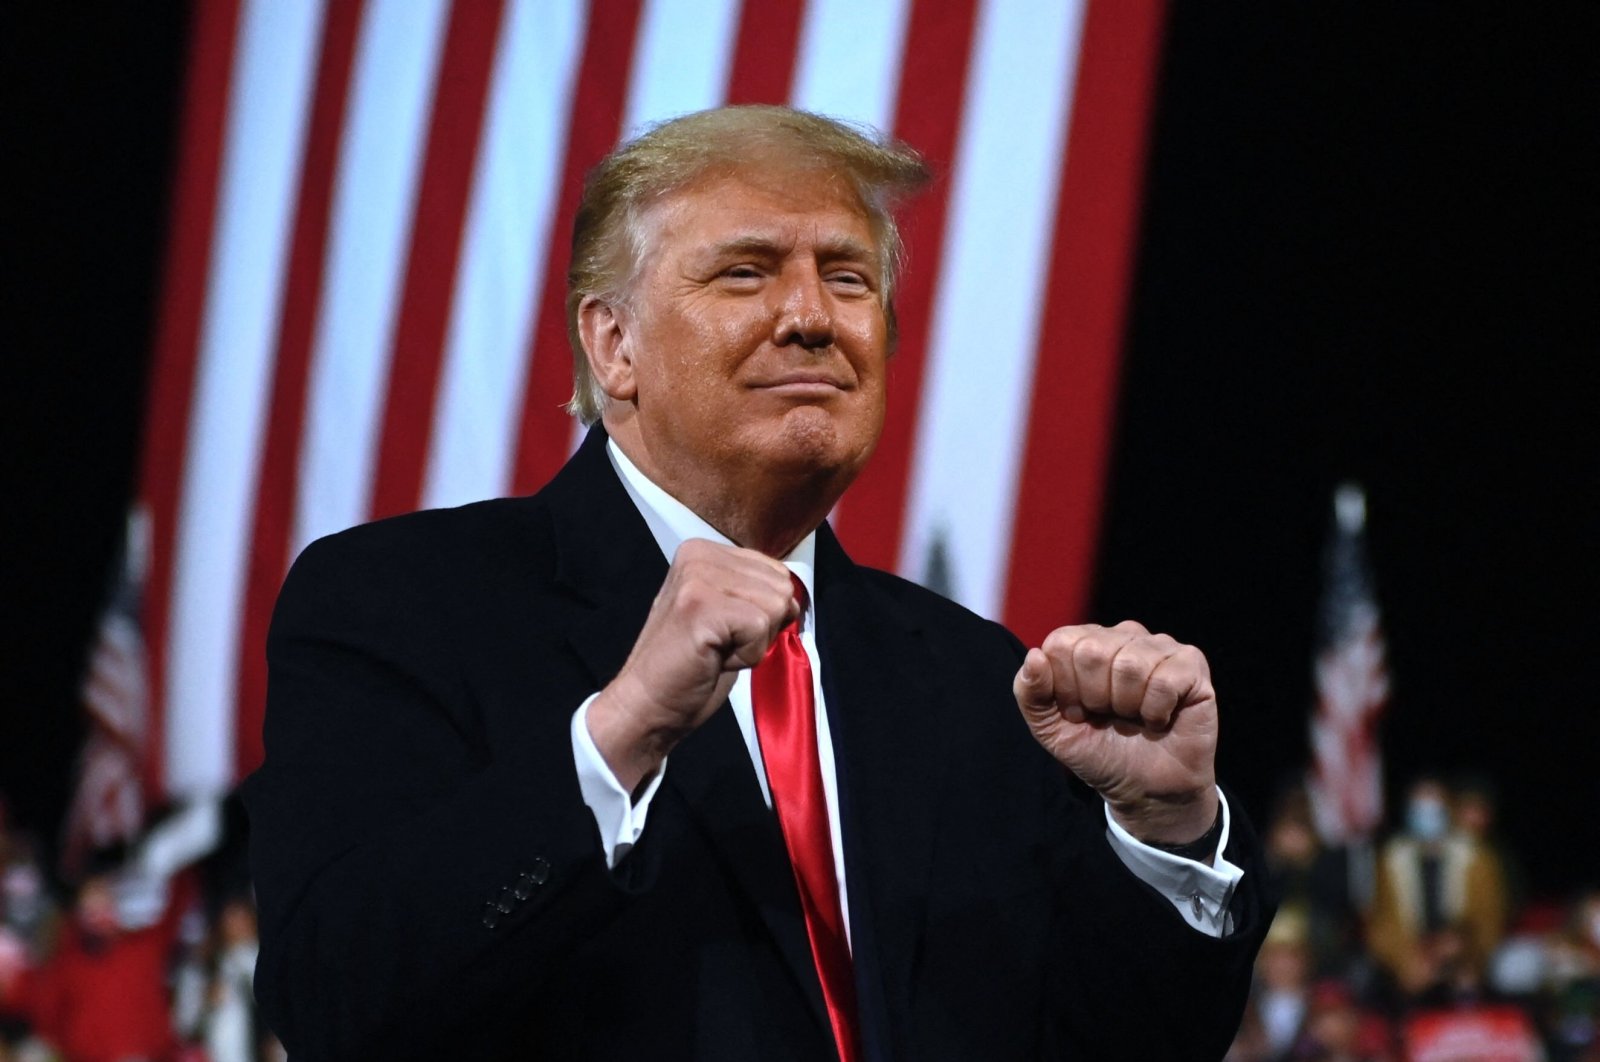 Then-U.S. President Donald Trump holds up his fists at the end of a rally to support Republican Senate candidates at Valdosta Regional Airport in Valdosta, Georgia, U.S., Dec. 05, 2020. (AFP Photo)